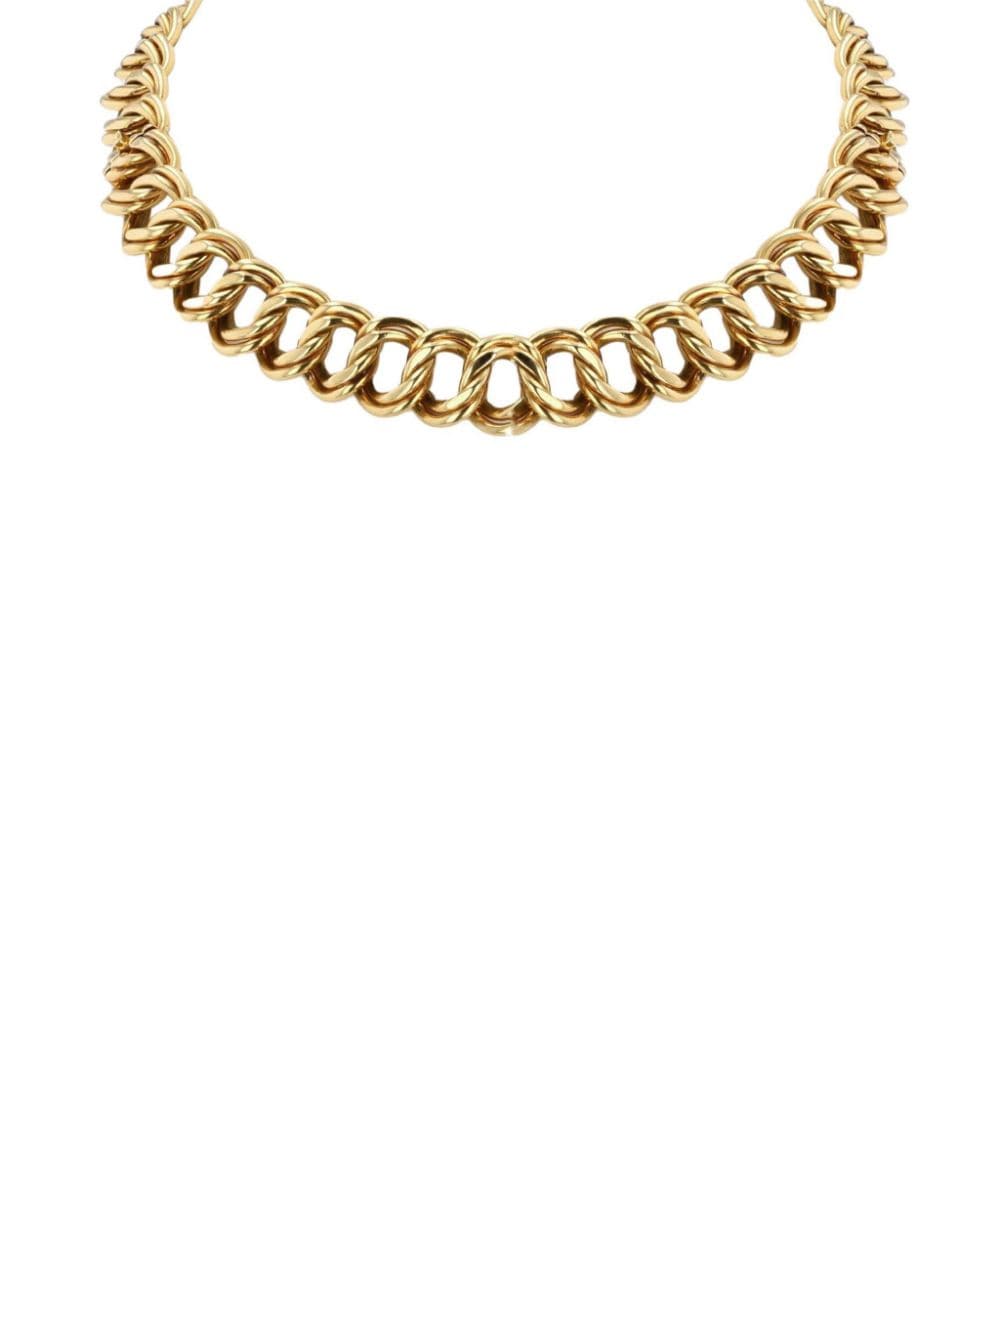 1970s 18kt yellow gold chain necklace